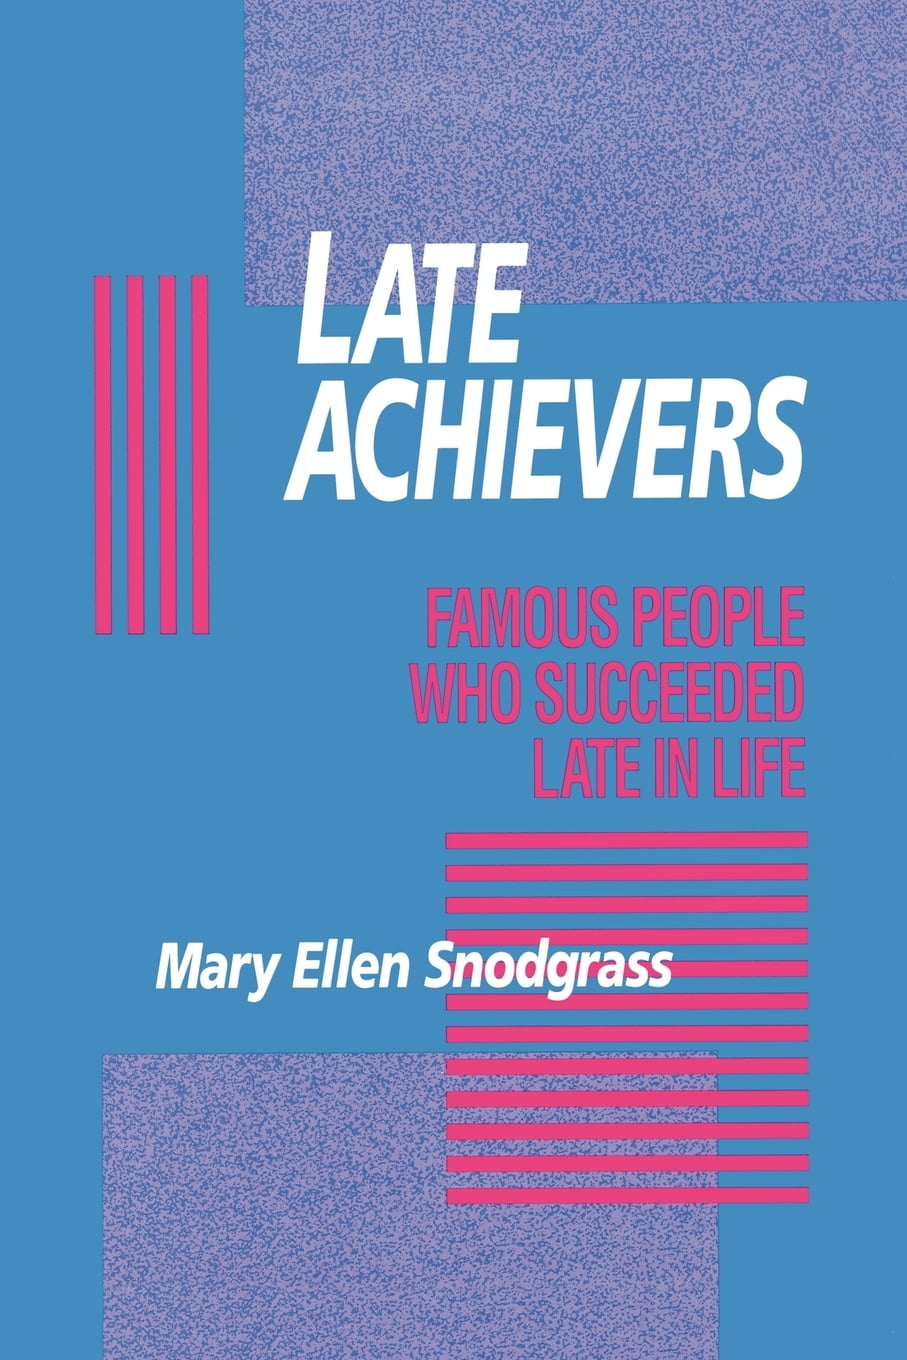 Late Achievers Famous People Who Succeeded Late in Life (Paperback)